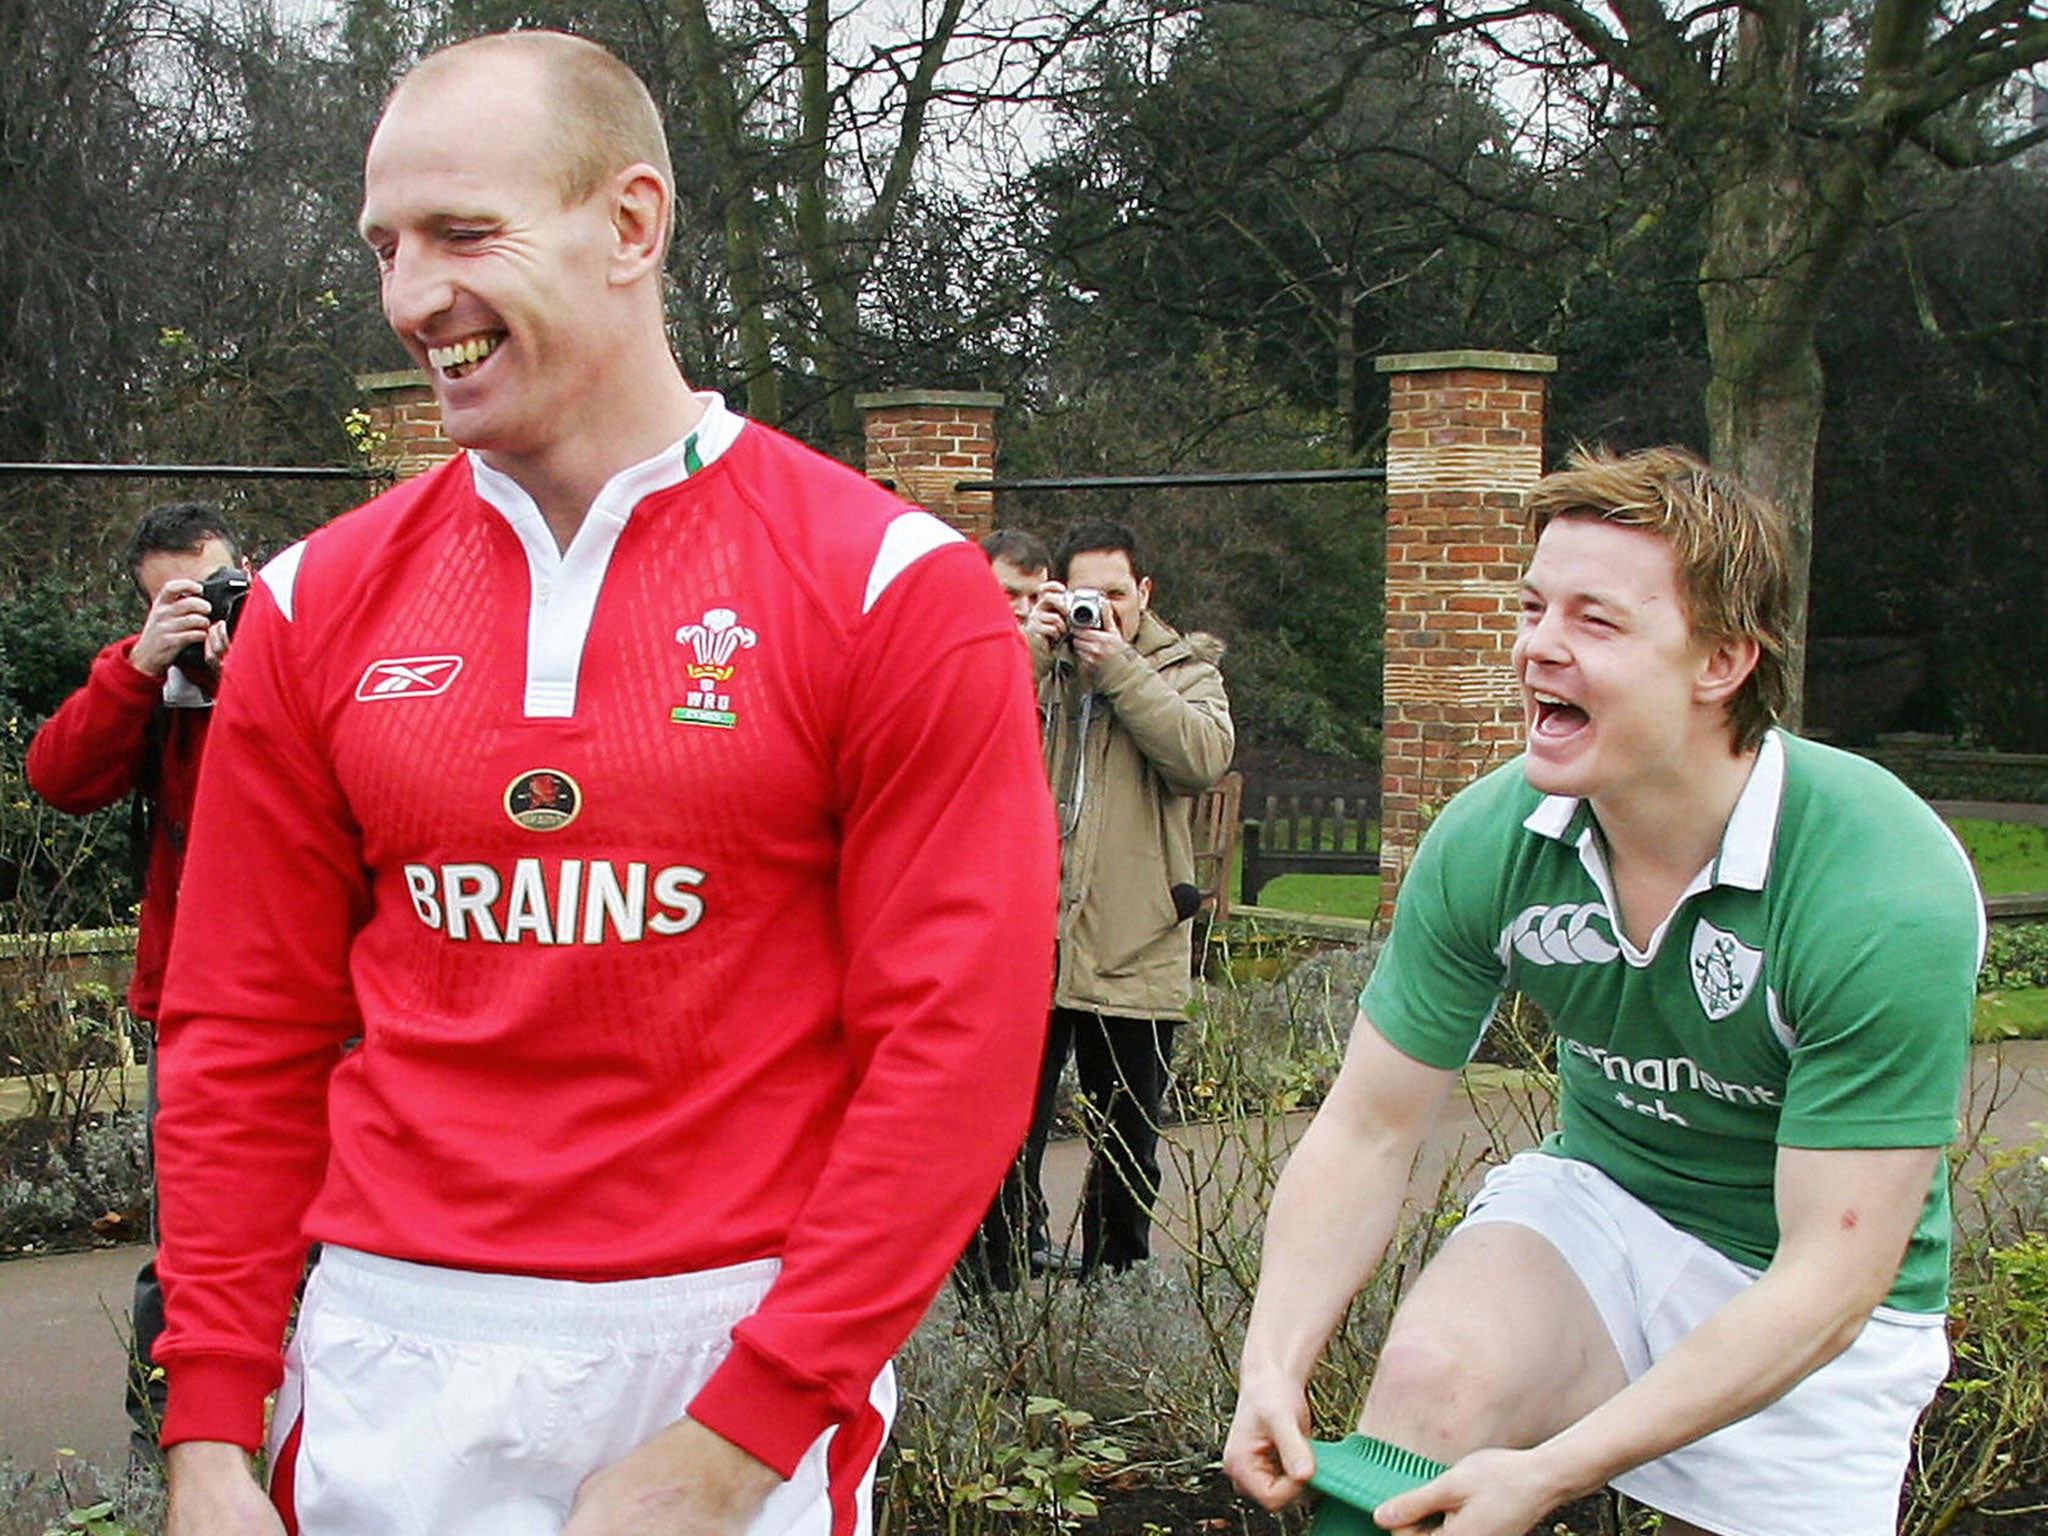 Former respective Wales and Ireland captains Thomas and O'Driscoll